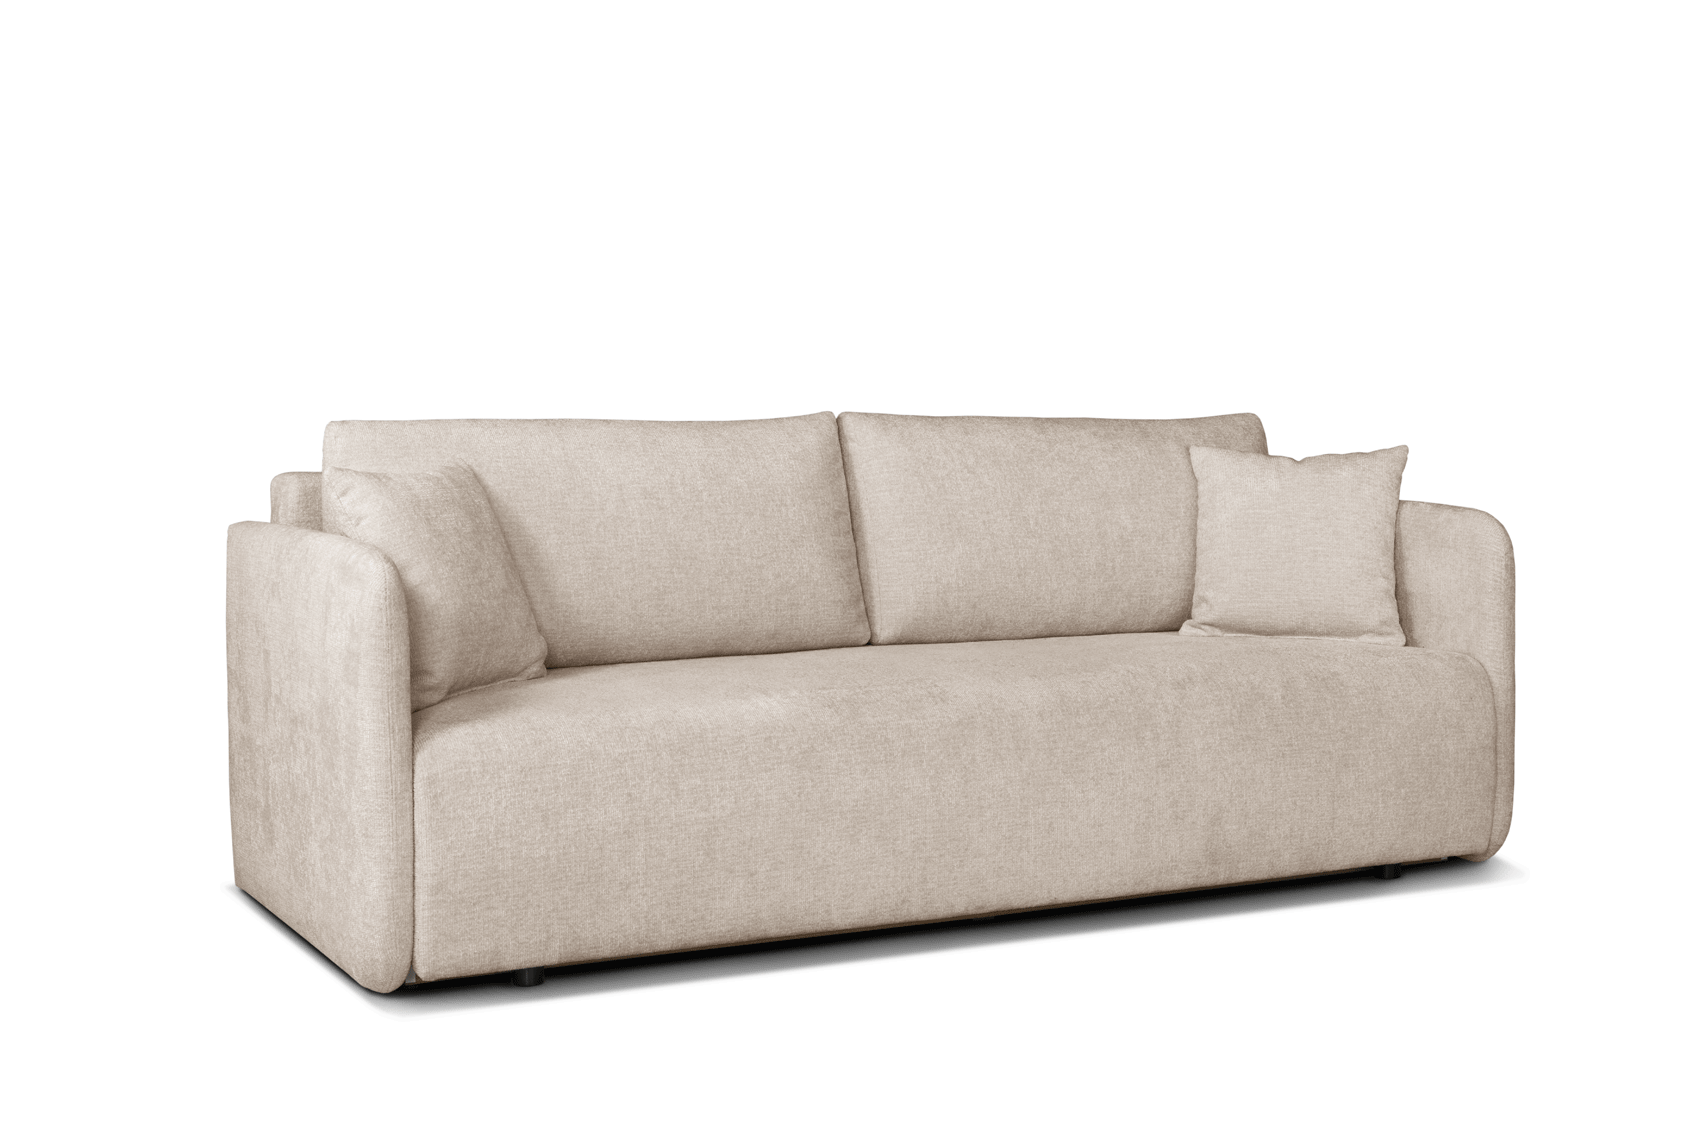 Living Room Furniture Sleepers Sofas Loveseats and Chairs Allen Sofa-Bed